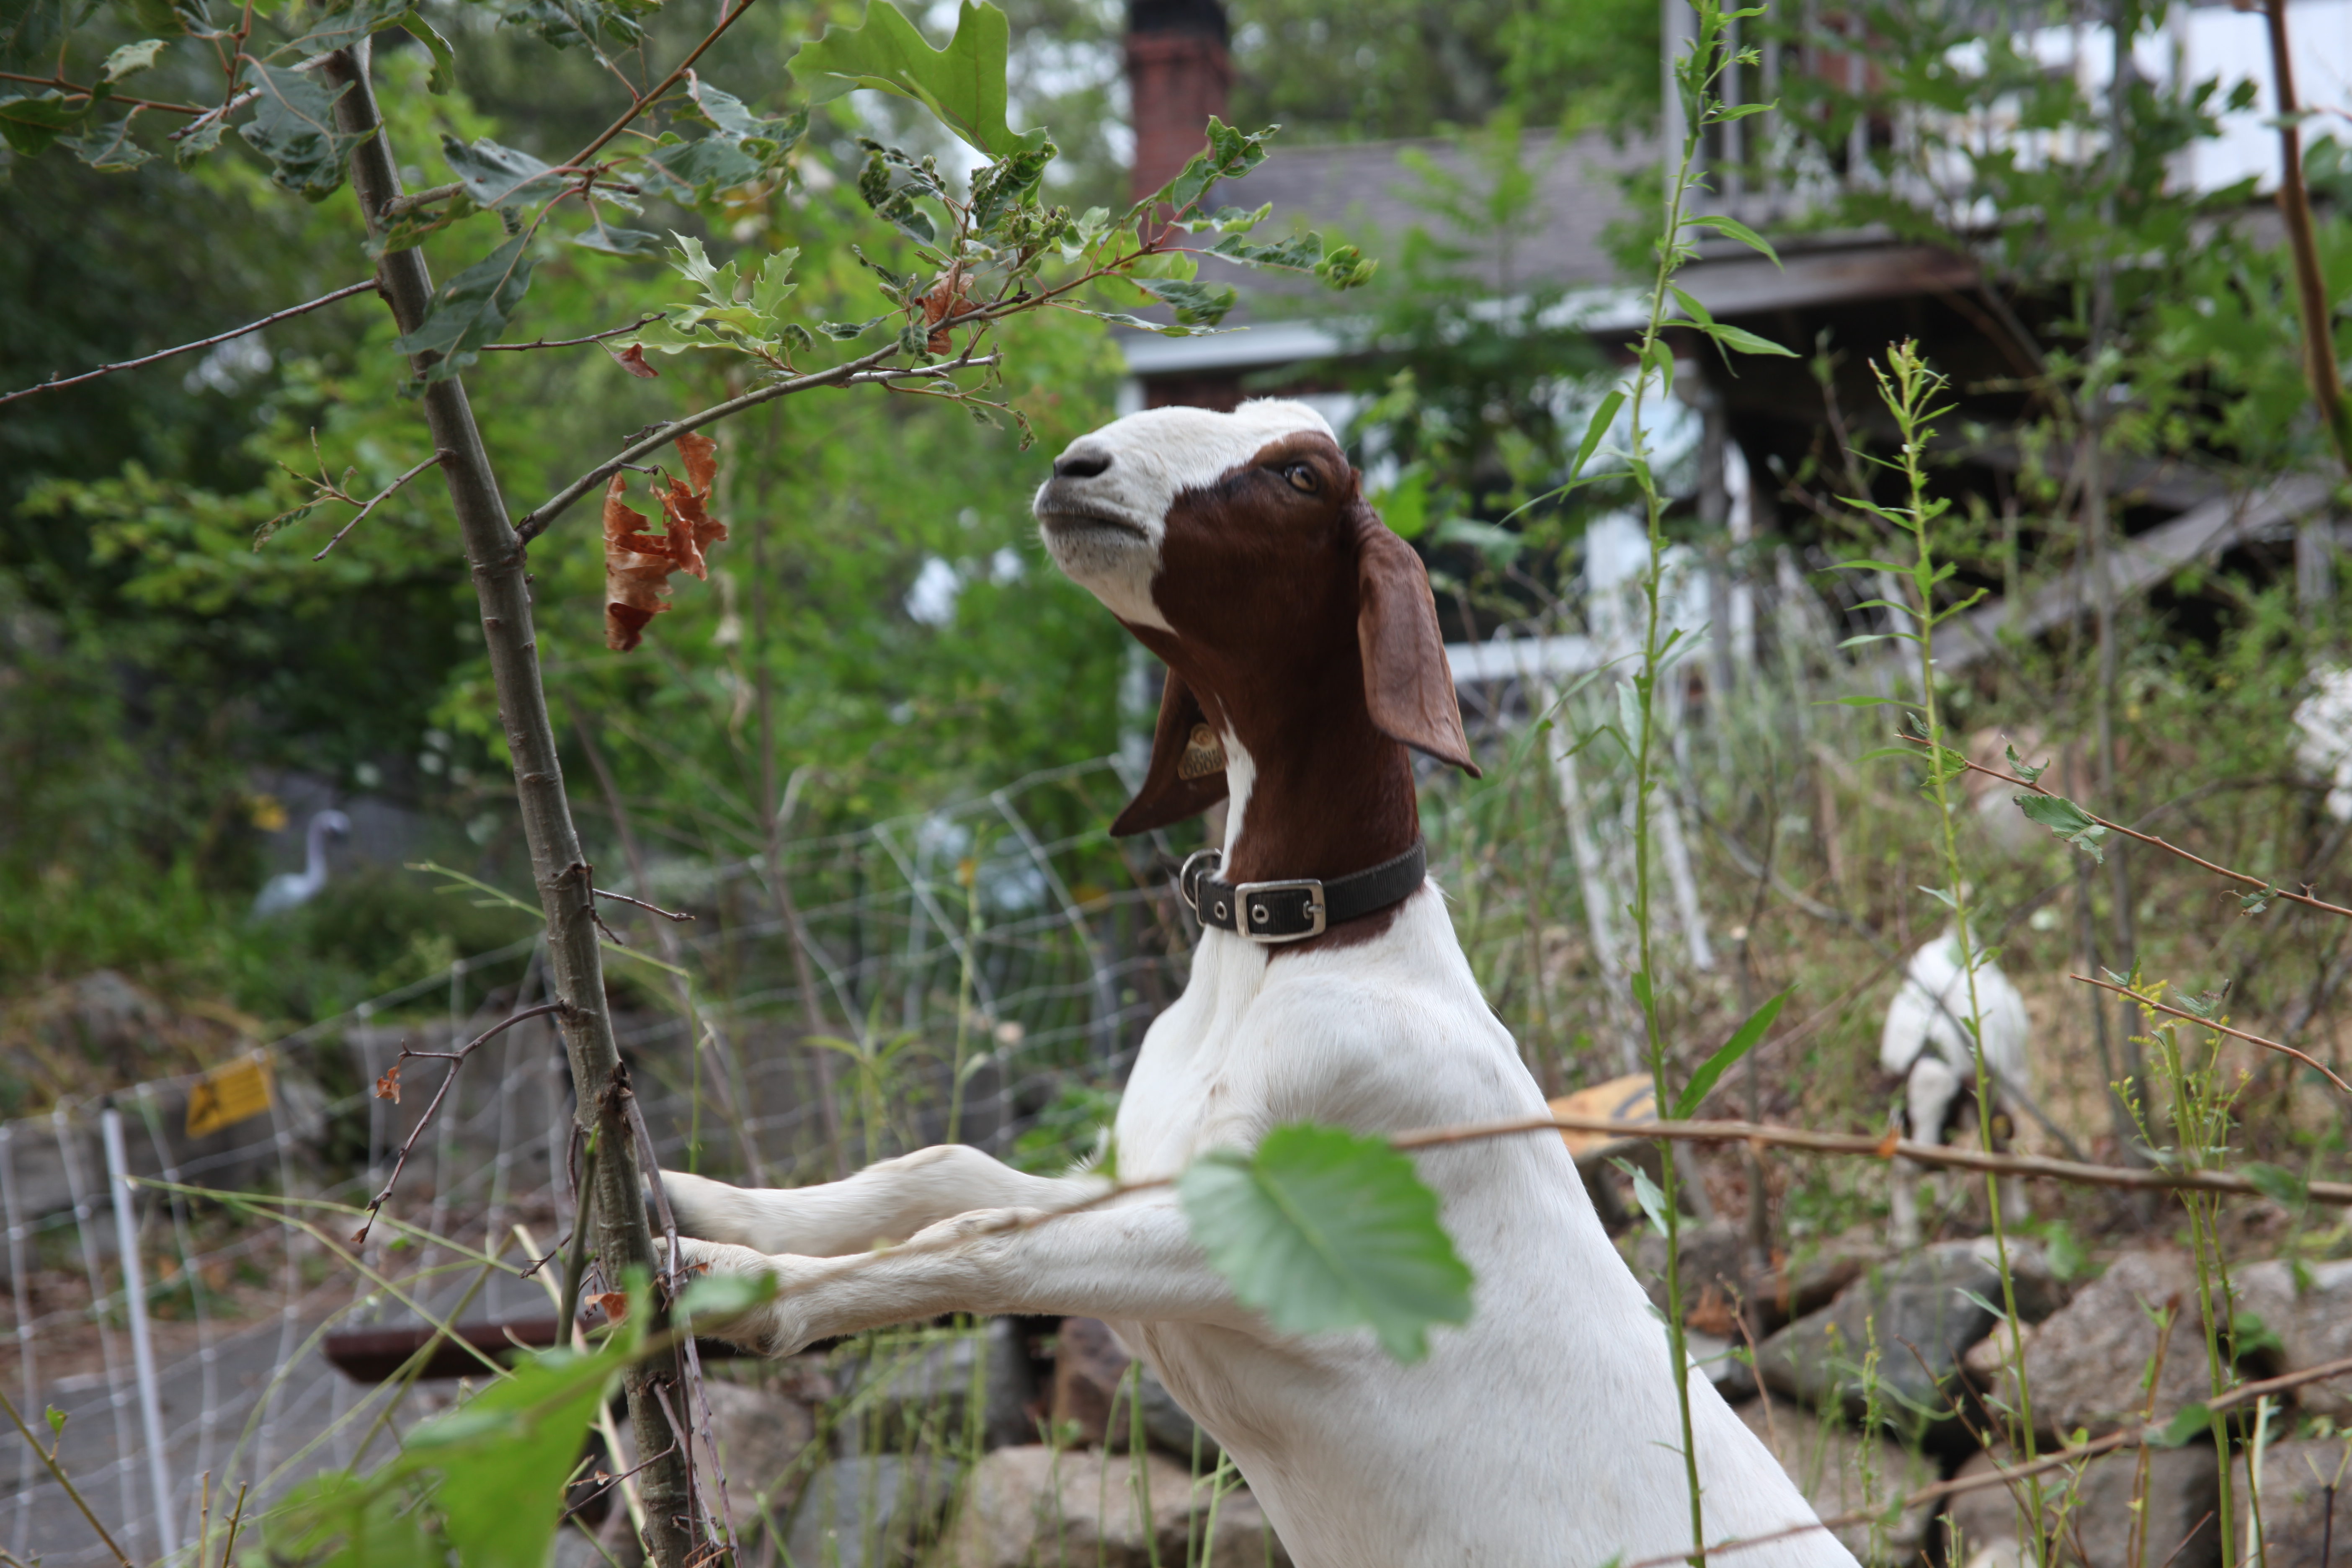 Massachusetts city brings in goats to eat poison ivy